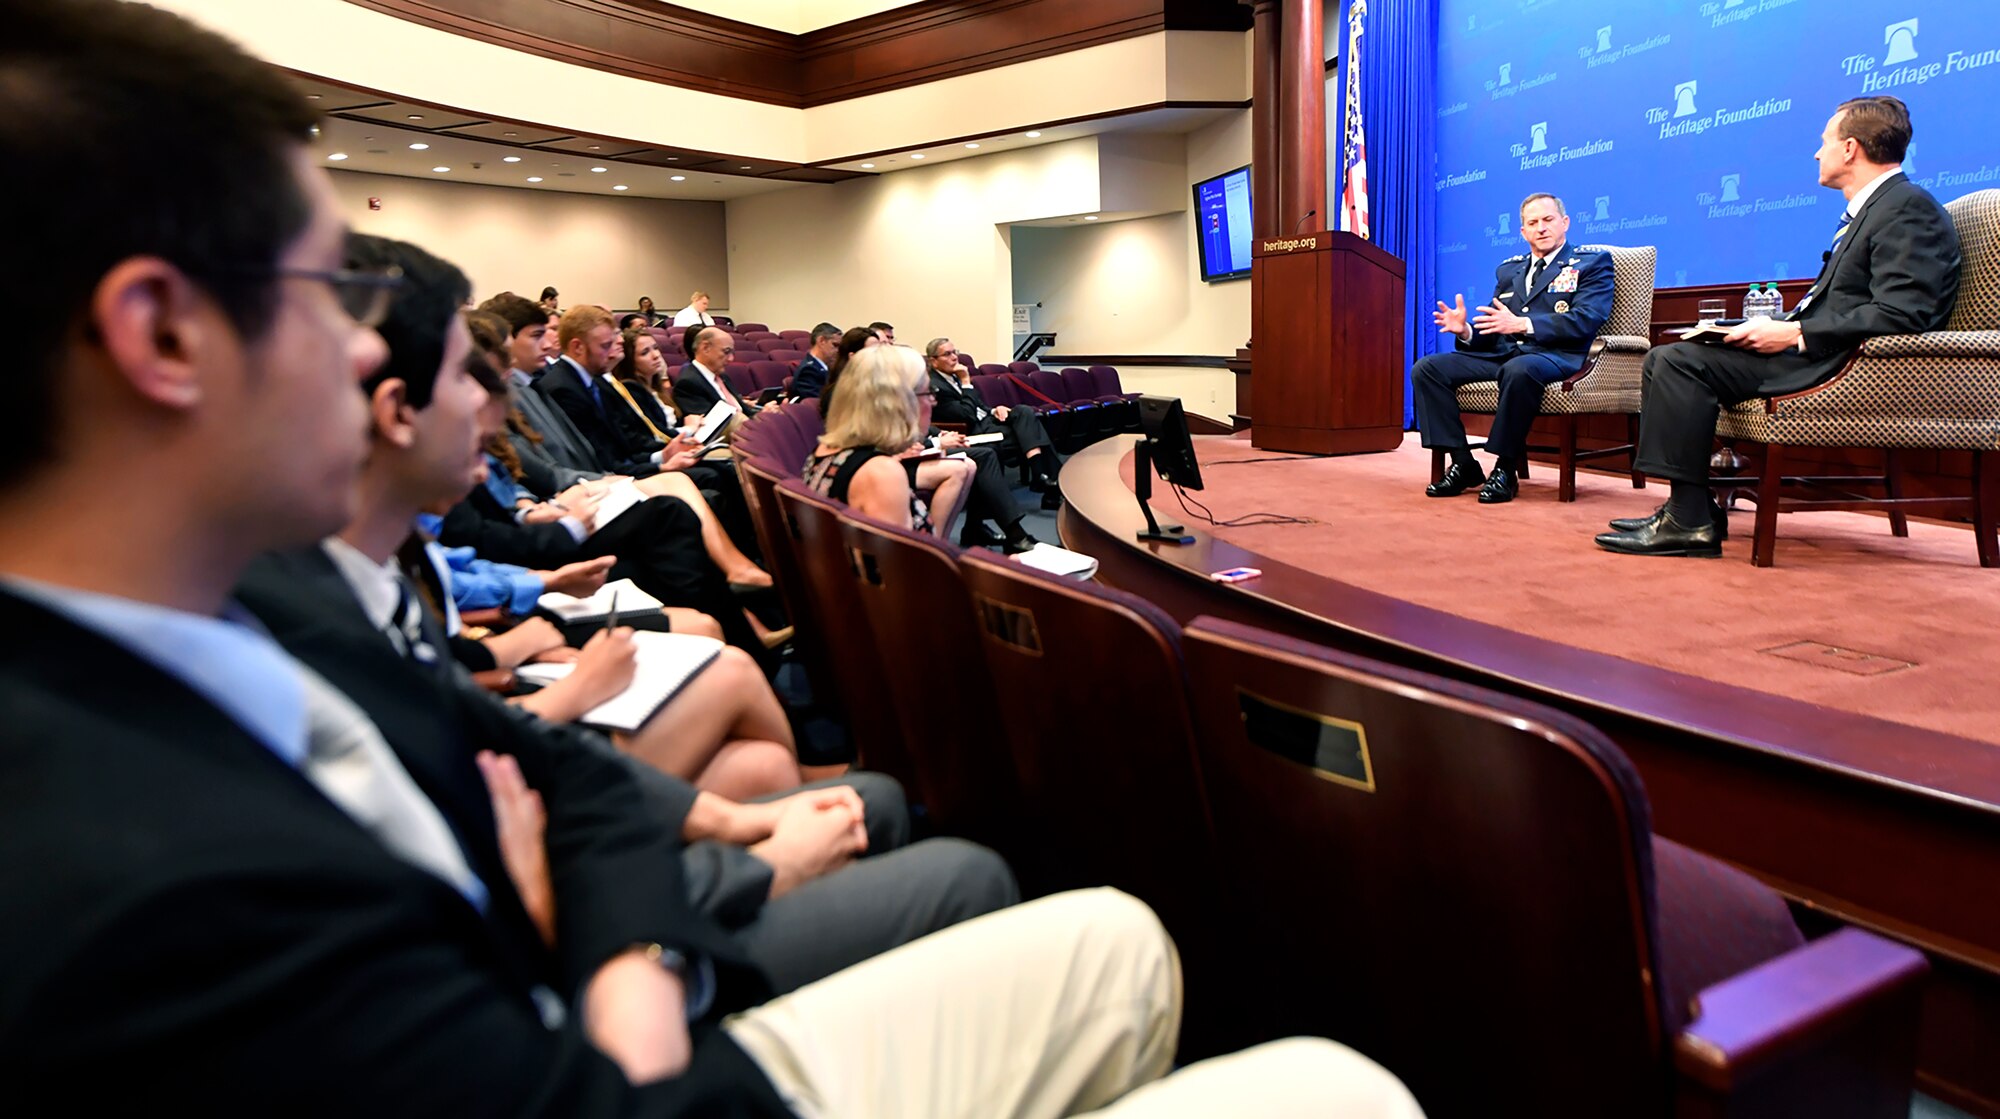 Participants listen to the Air Force Chief of Staff Gen. David L. Goldfein’s discussion at the Heritage Foundation in Washington, D.C., April 12, 2017. The CSAF discussed readiness, national security and challenges for the Air Force warfighter. (U.S. Air Force photo/Wayne A. Clark)